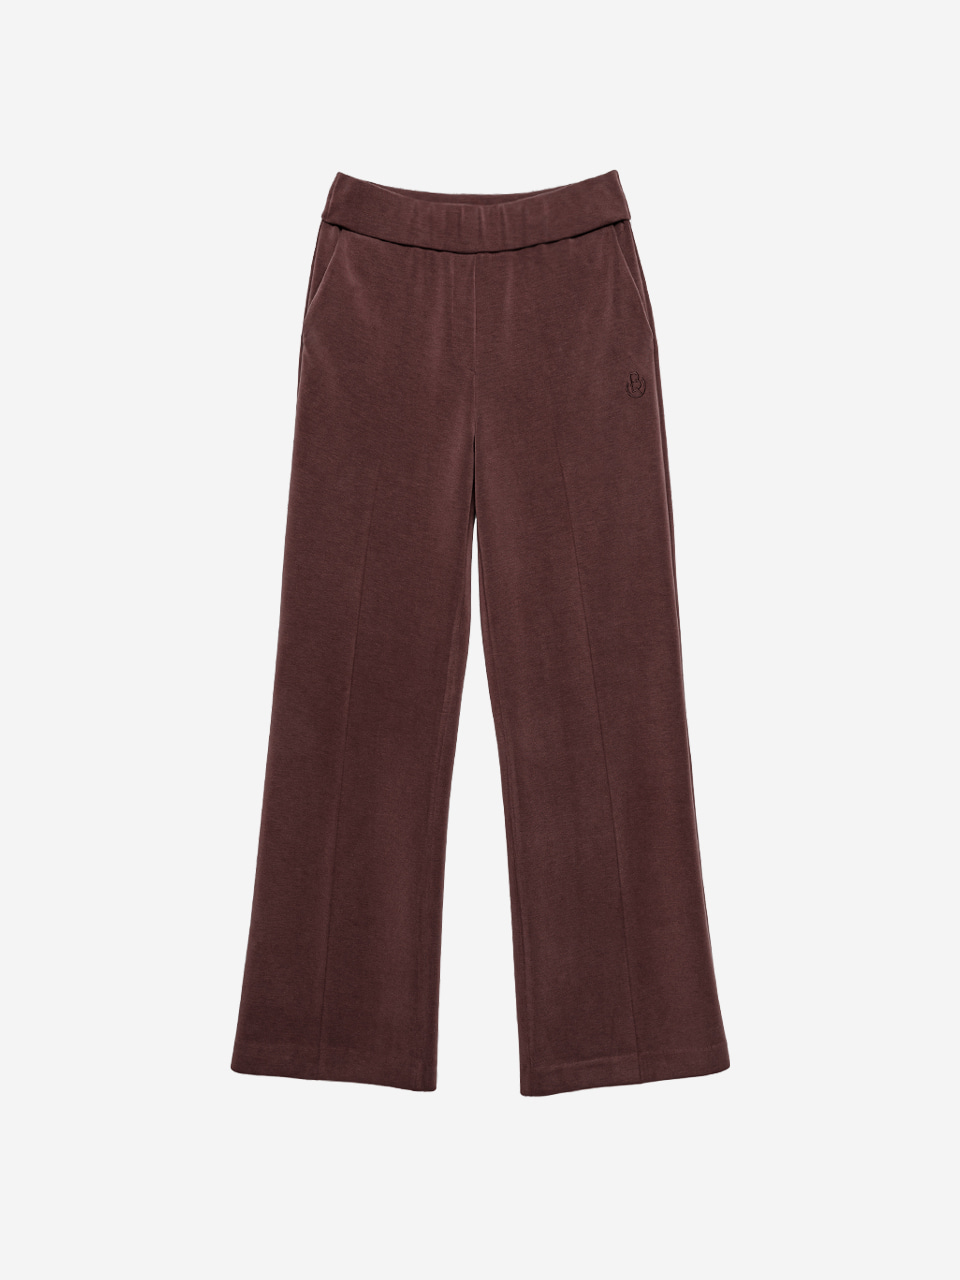 Modal Straight Pants (red brown)